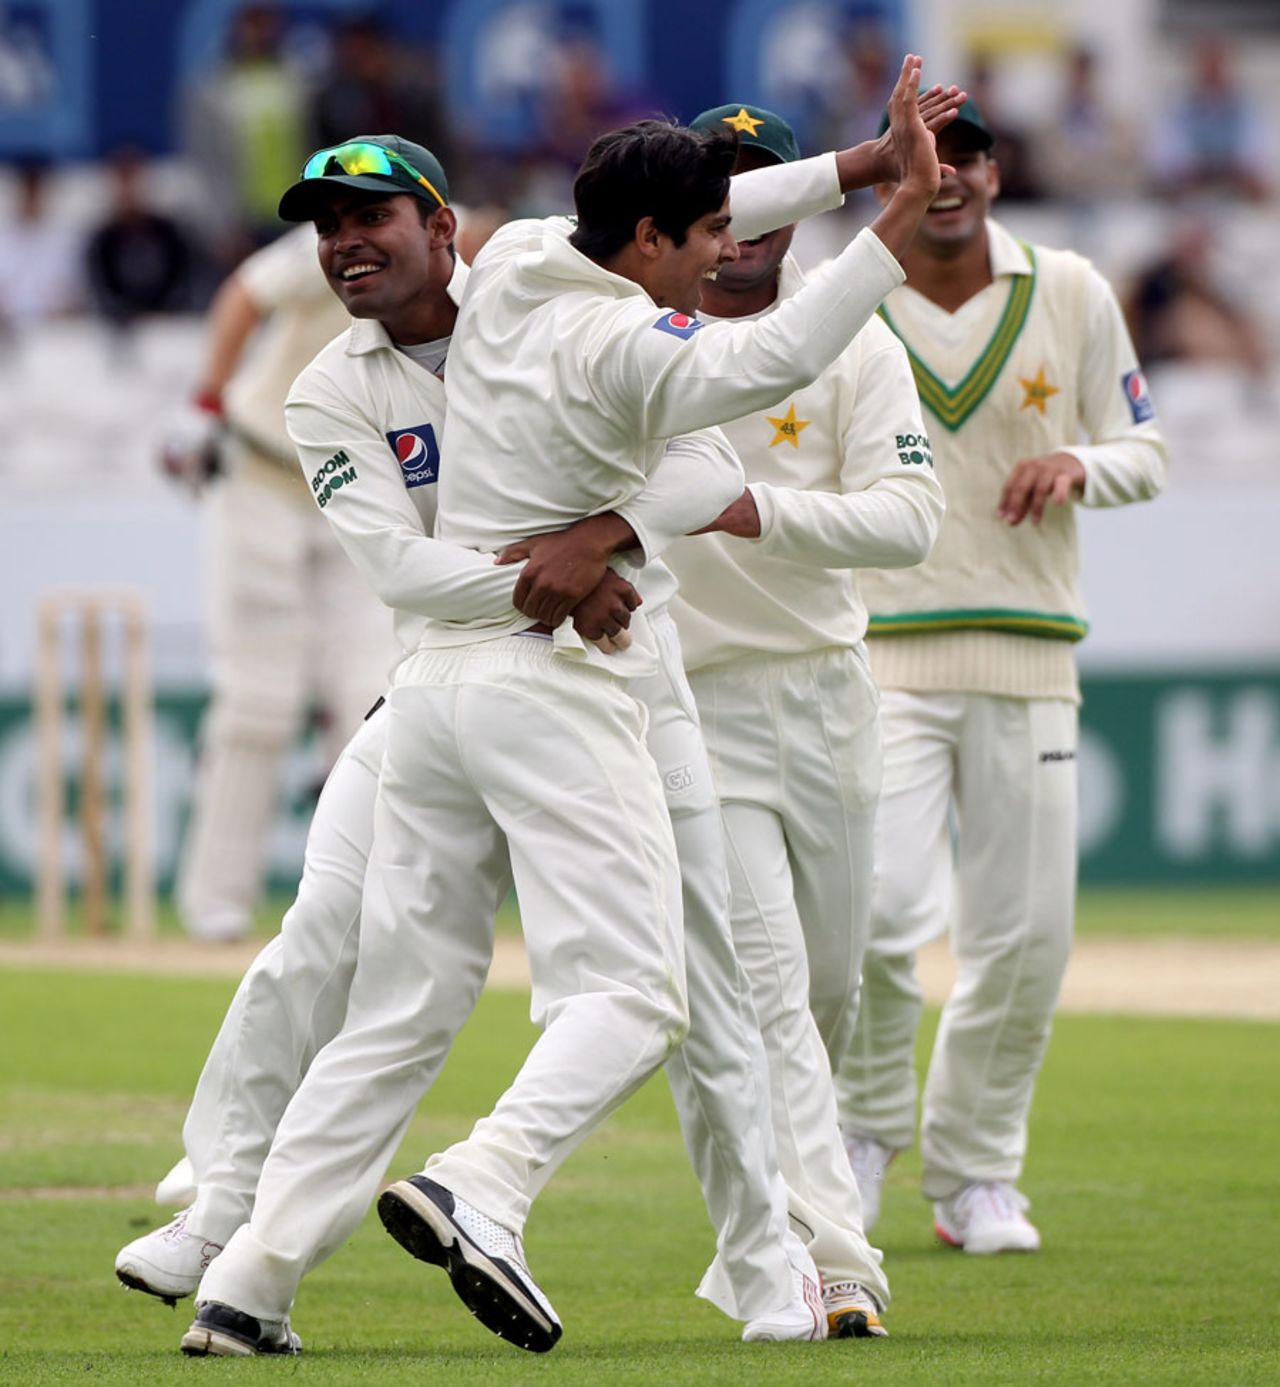 Umar Amin is engulfed by his team-mates after claiming Marcus North as his maiden Test wicket, Pakistan v Australia, 2nd Test, Headingley, July 21, 2010